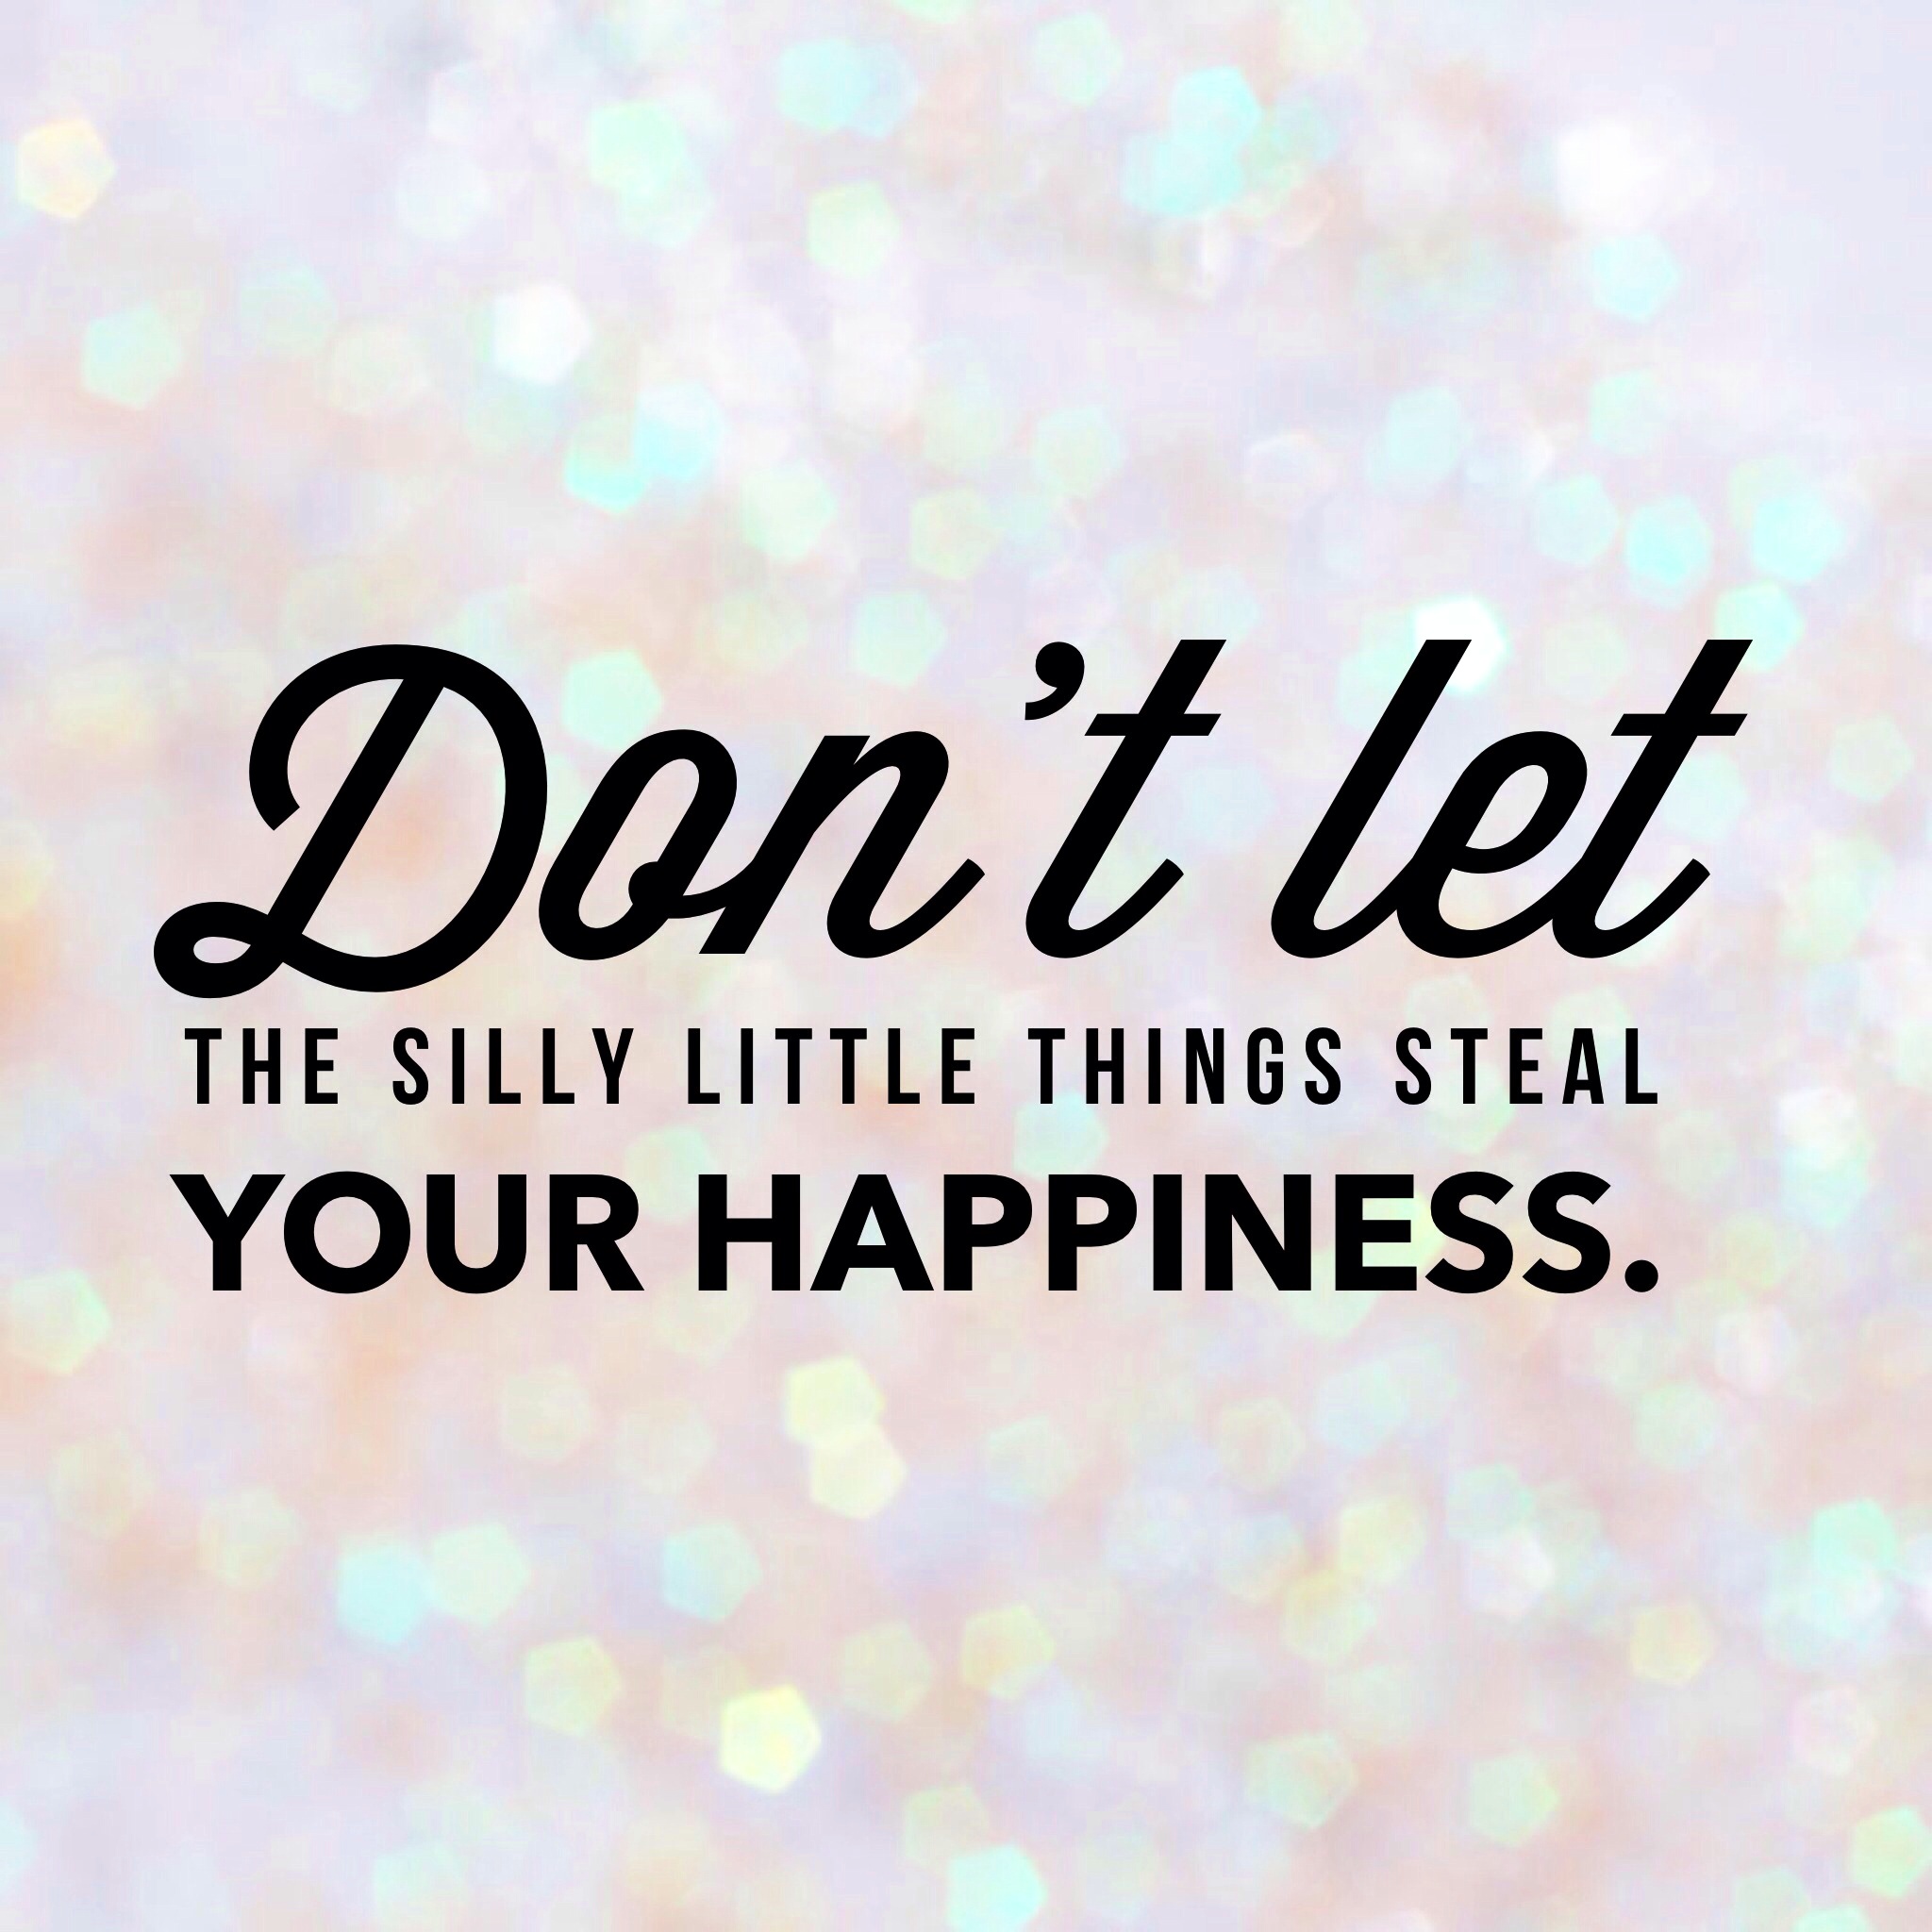 8 Ways to Stop the Silly Things from Stealing Your Happiness